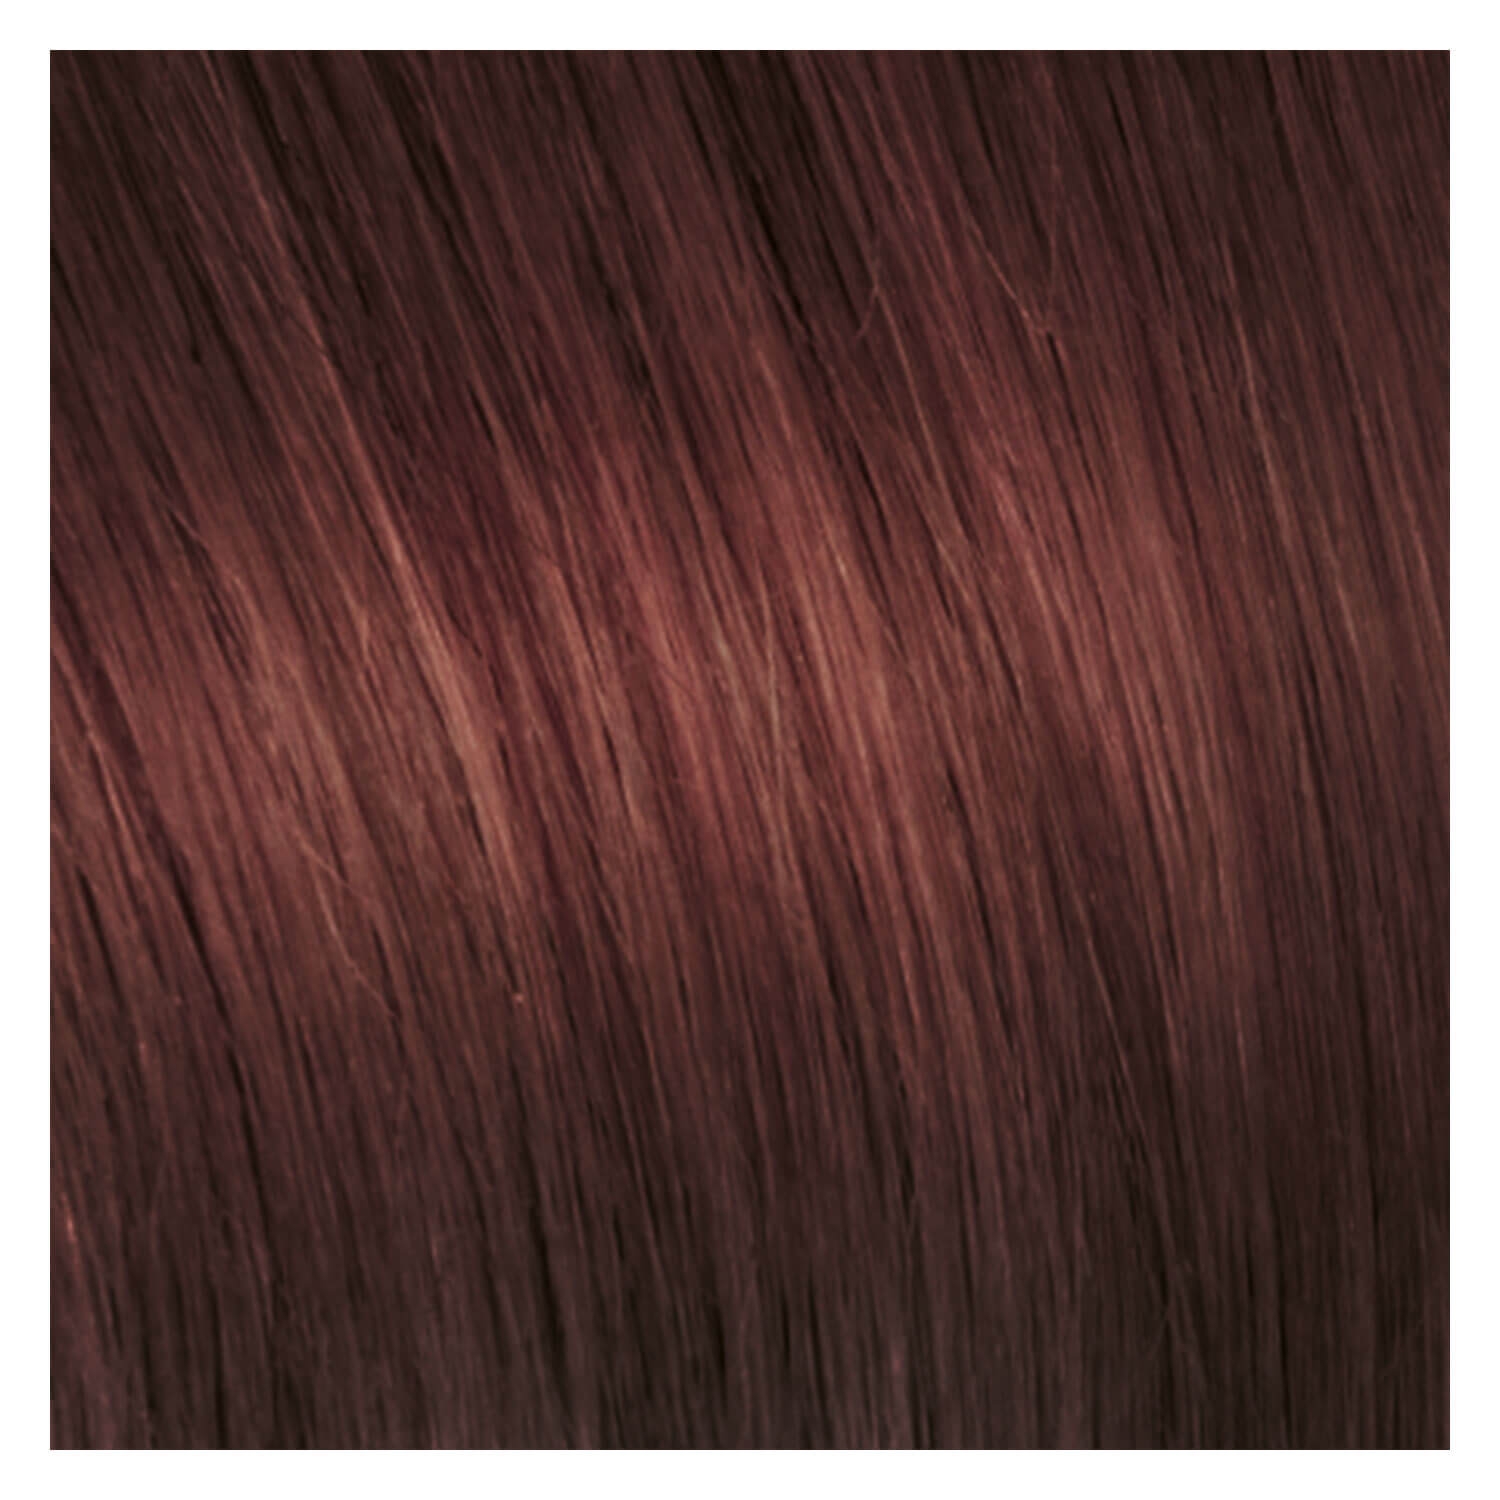 Product image from SHE Bonding-System Hair Extensions Wavy - 32 Mahagoni Kastanienbraun 55/60cm